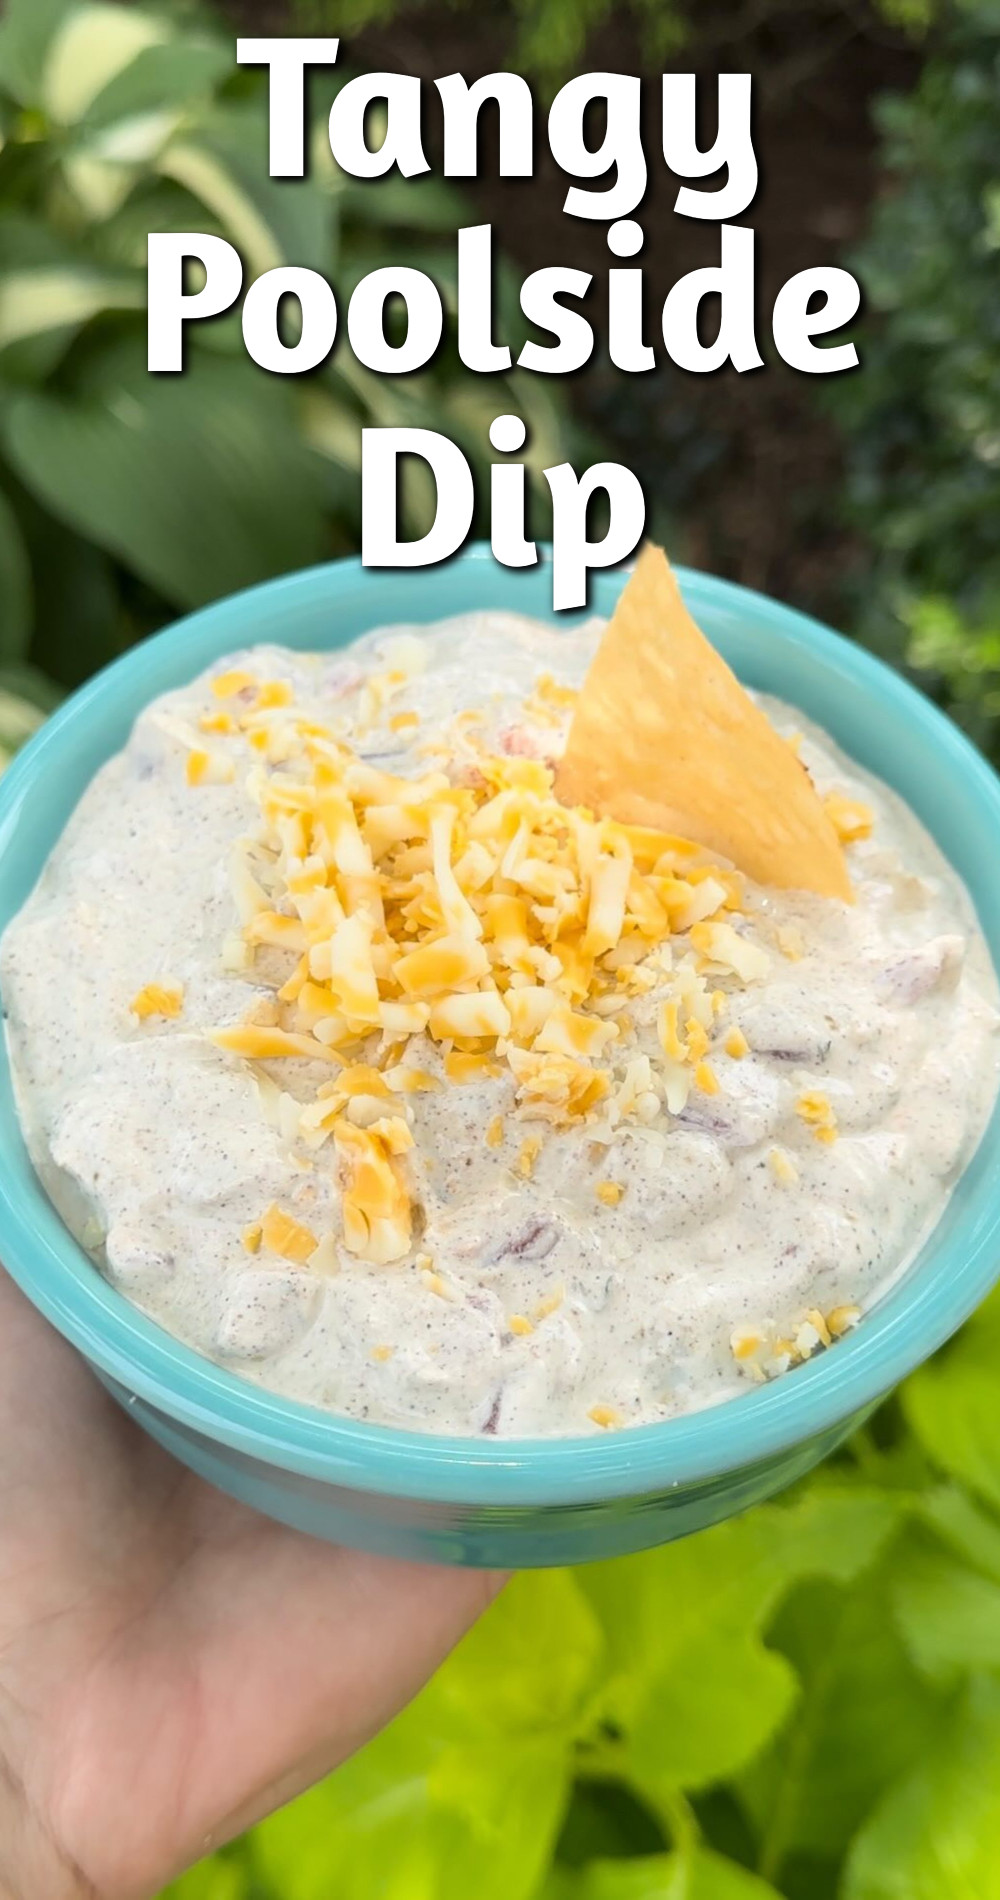 Tangy Poolside Dip